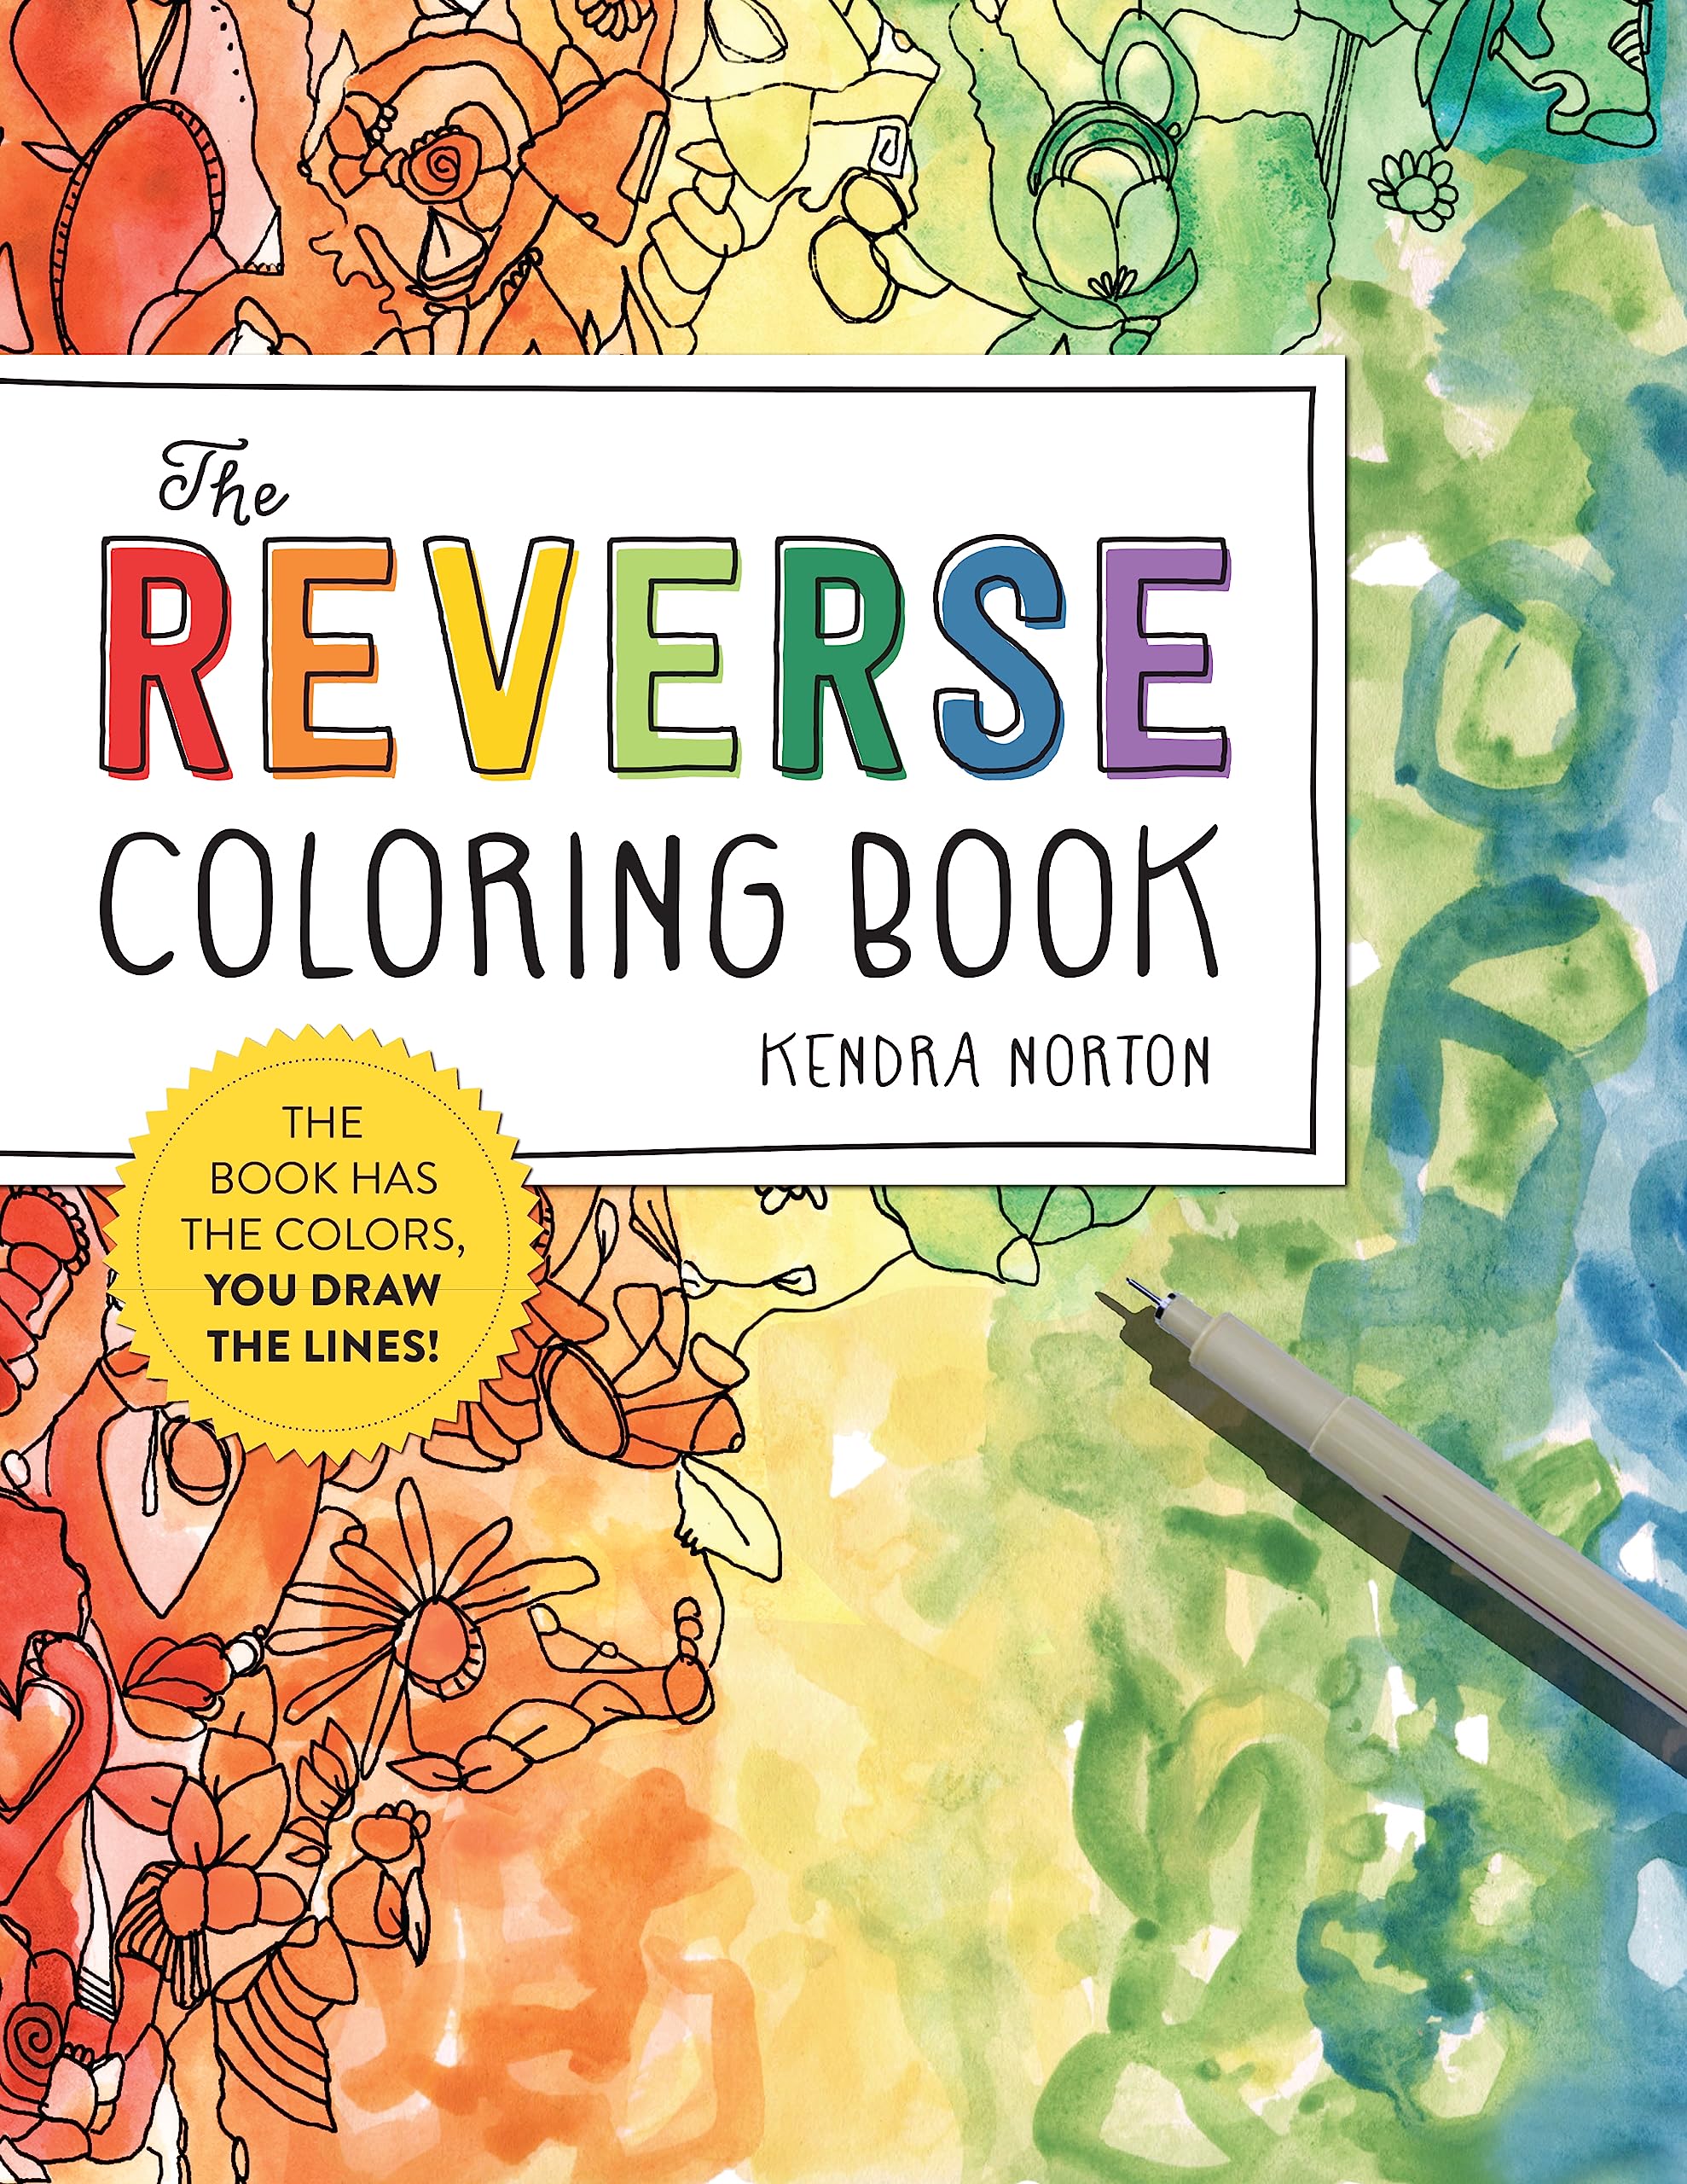 Red, orange, yellow, and green watercolor streaks cover the book cover. Black line art has been drawn on top of it and a pen is shown. Text reads The Reverse Coloring Book.